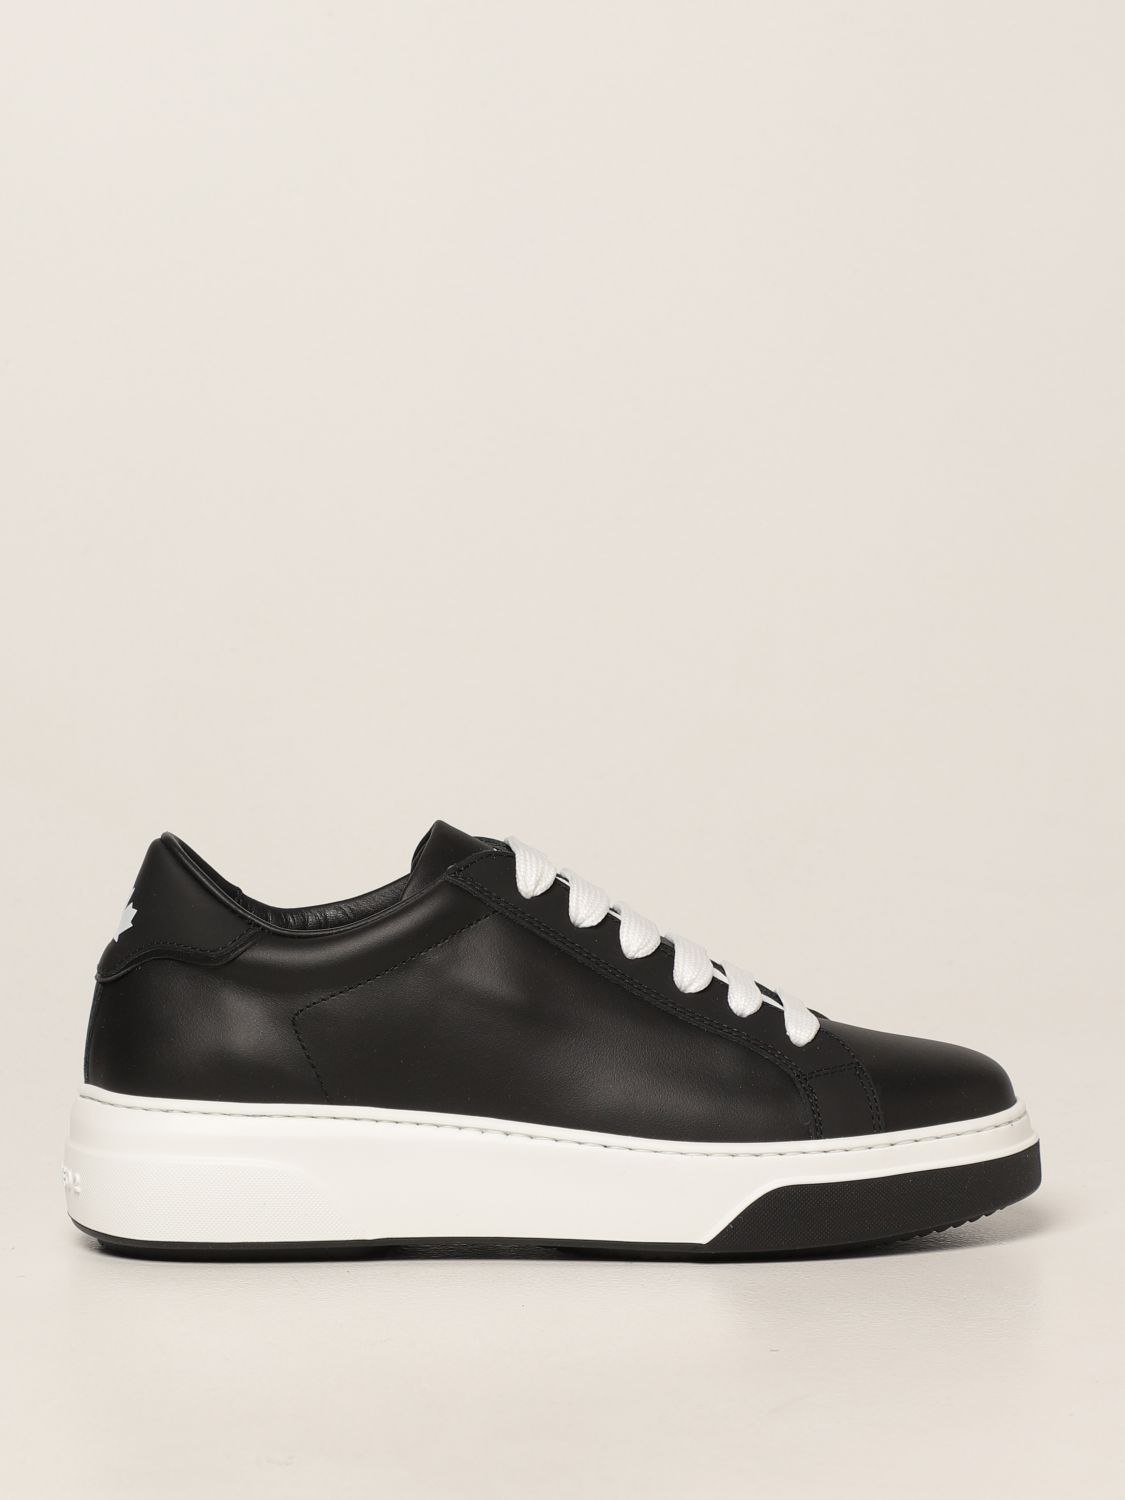 DSQUARED2: Bumper leather sneakers - Black | Dsquared2 sneakers ...